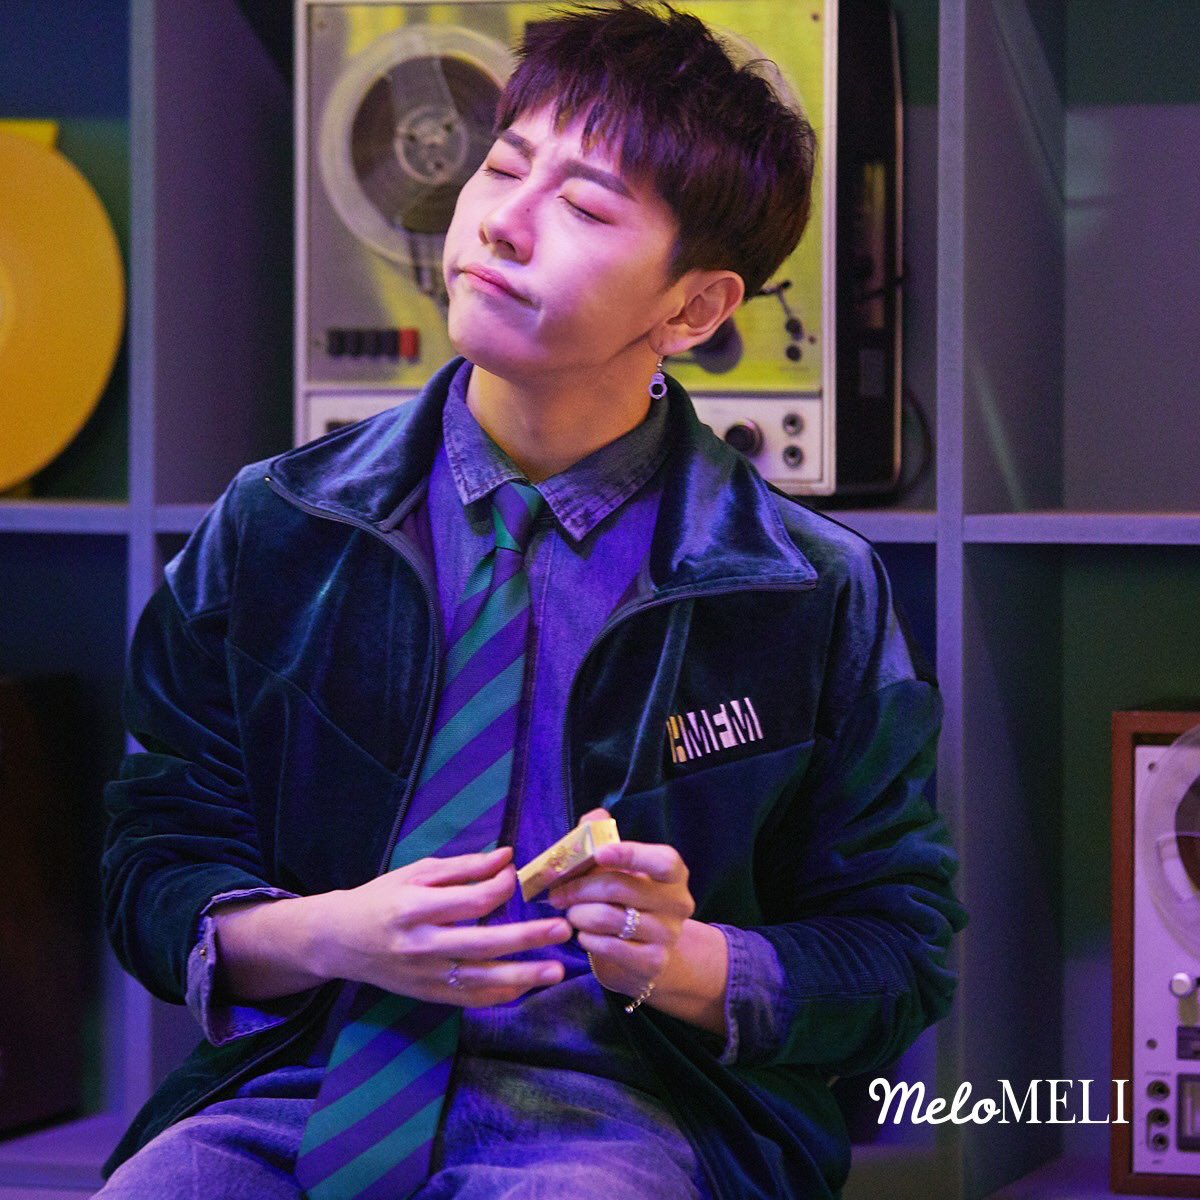 For Melomeli (3) he looks so gorgeous  #노태현